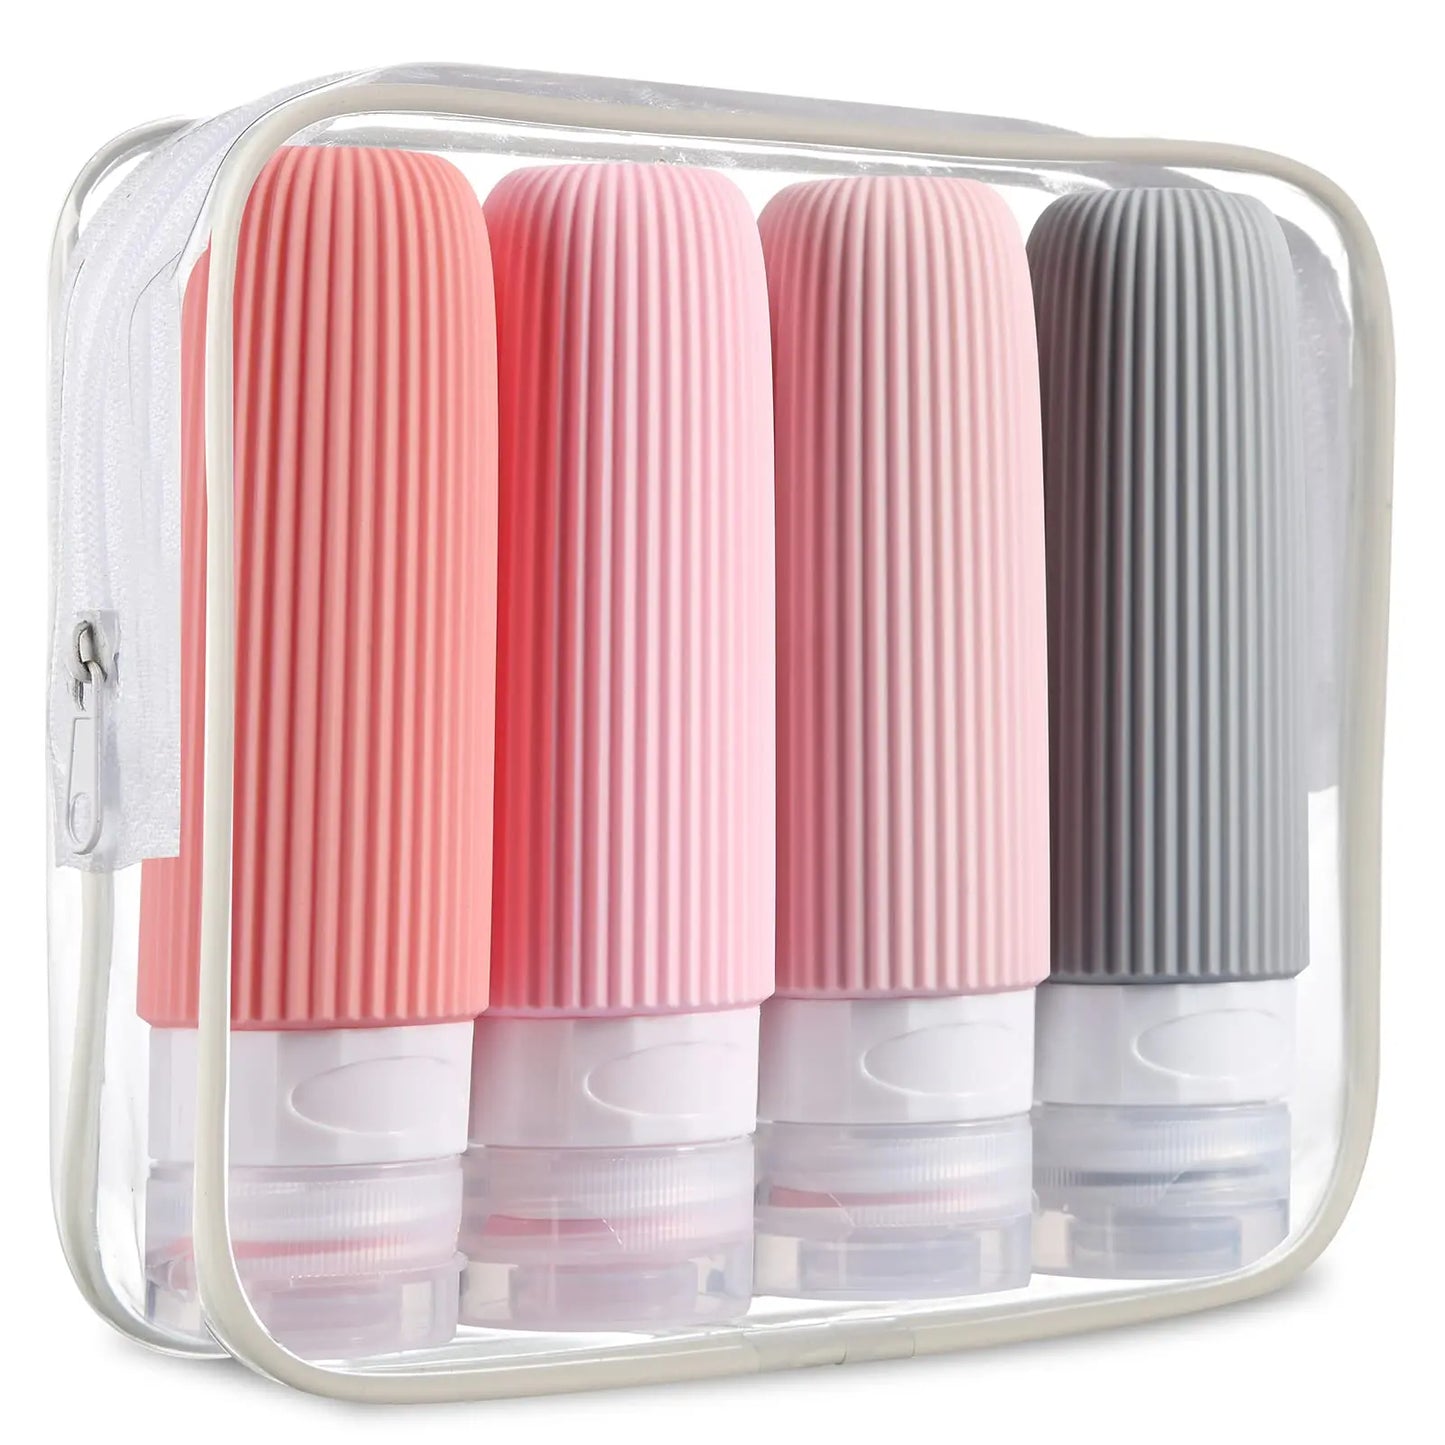 4 pack Silicone Travel Bottles for Toiletries